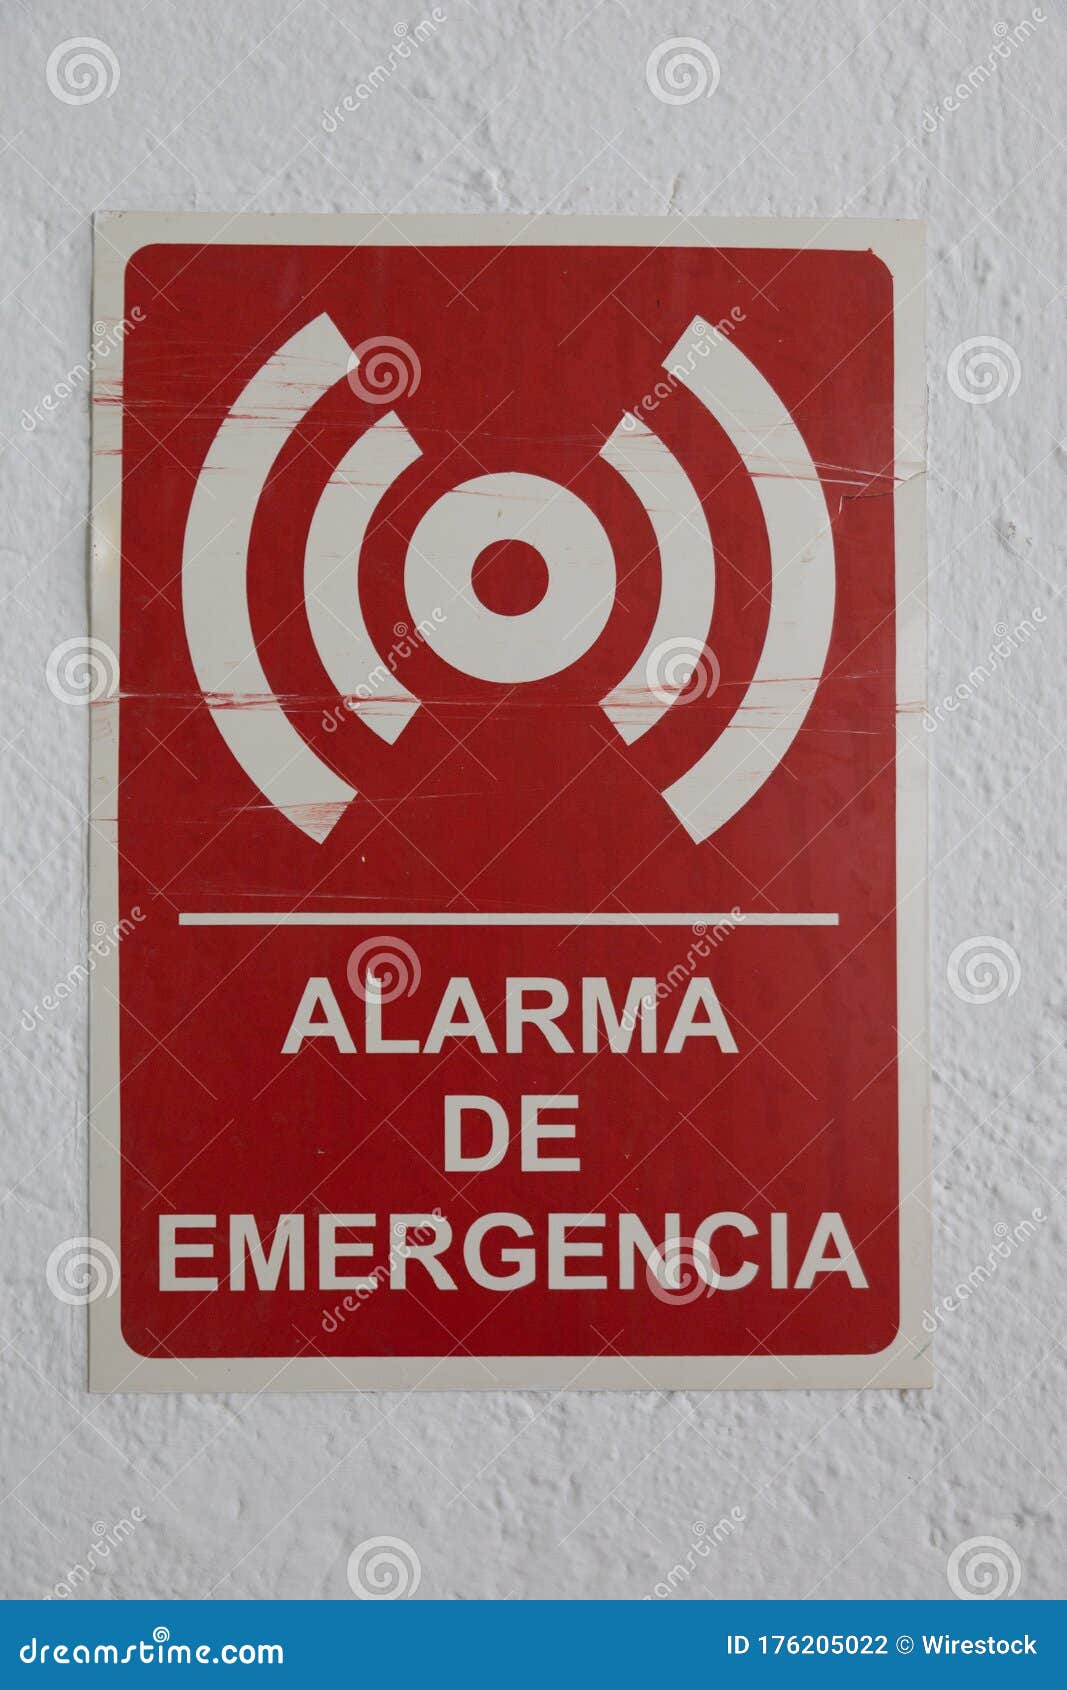 red alarma de emergencia - emergency alarm - sign on the white wall under the lights